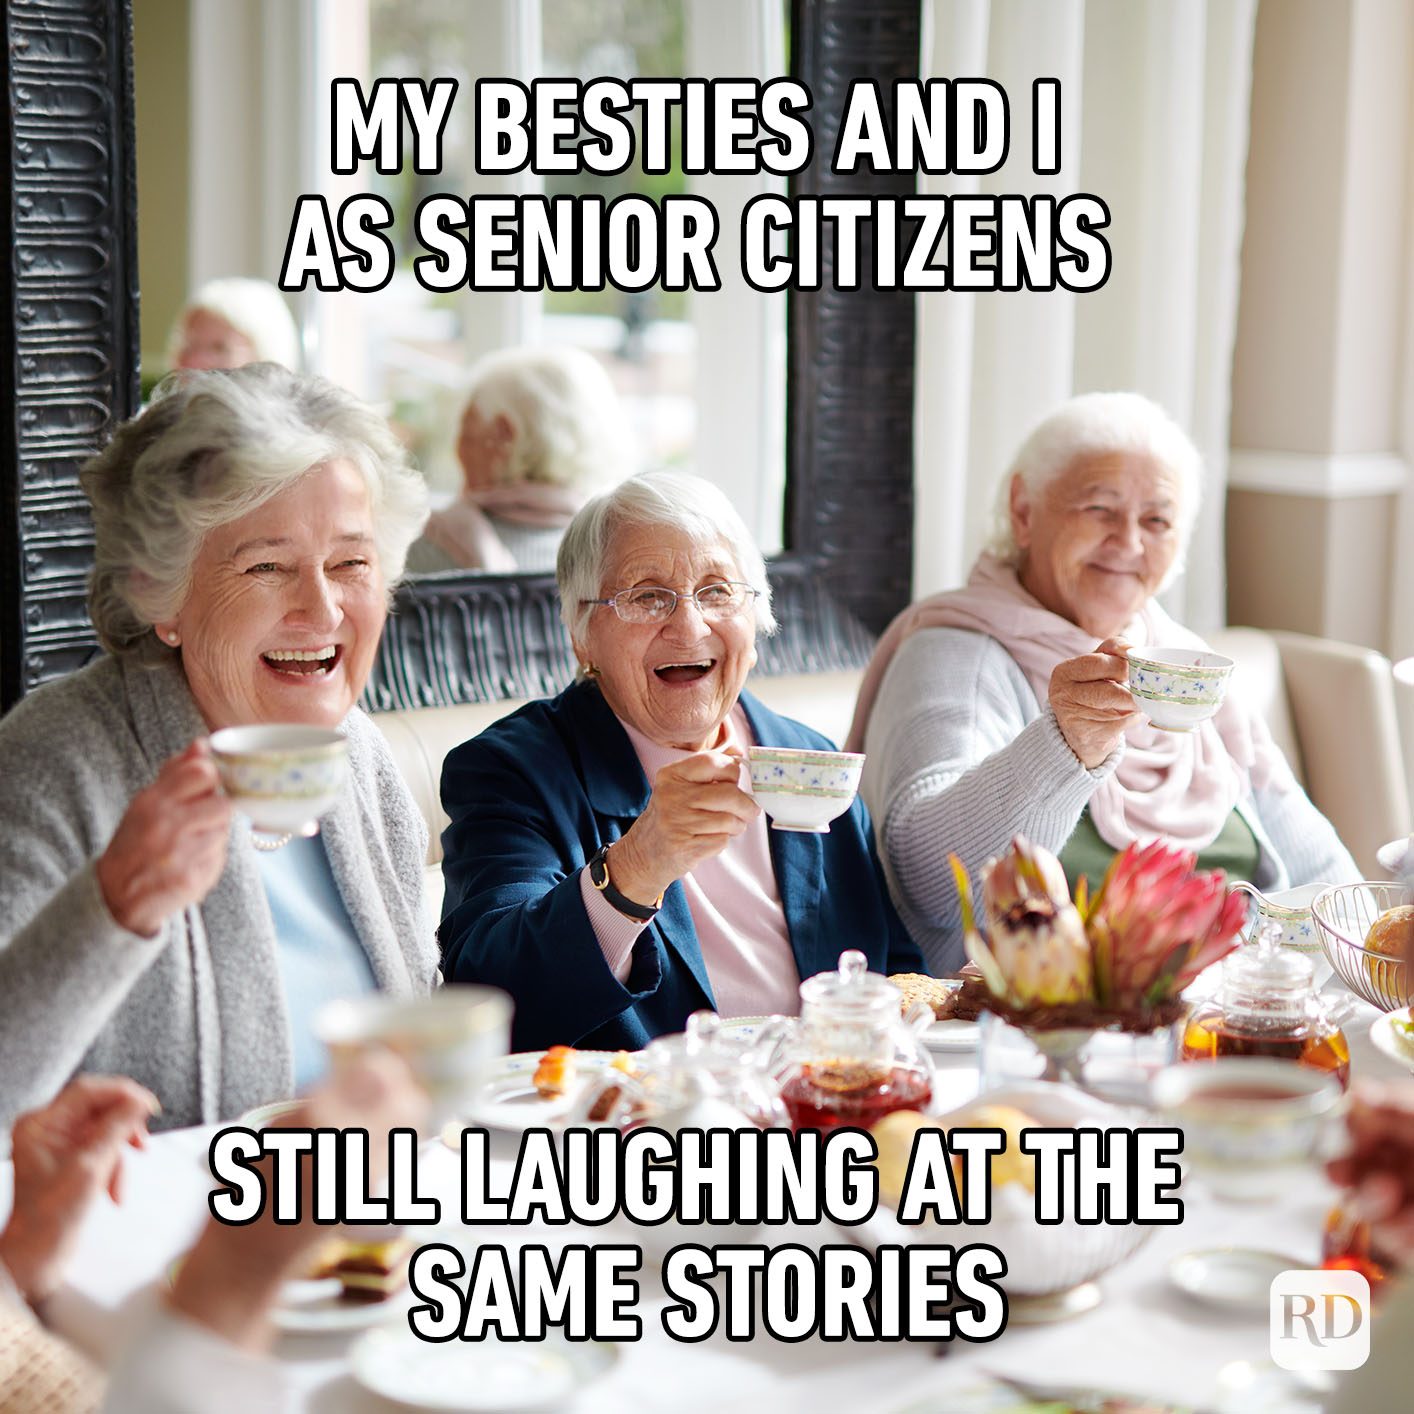 25 Funny Friend Memes to Send to Your Bestie | Reader's Digest